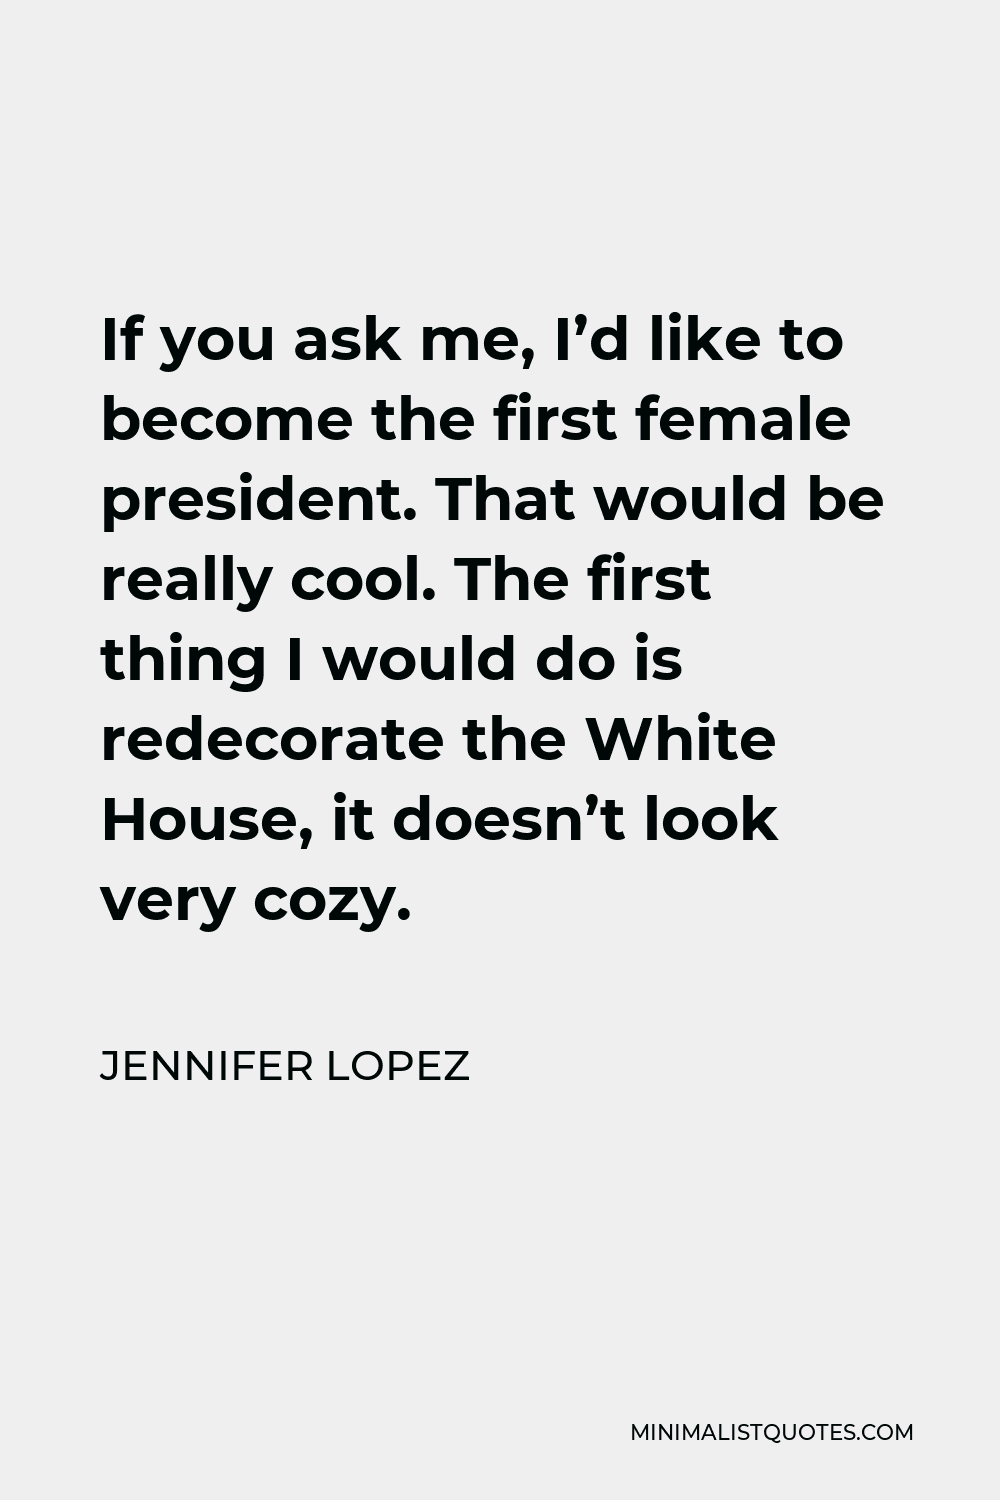 Jennifer Lopez Quote - If you ask me, I’d like to become the first female president. That would be really cool. The first thing I would do is redecorate the White House, it doesn’t look very cozy.